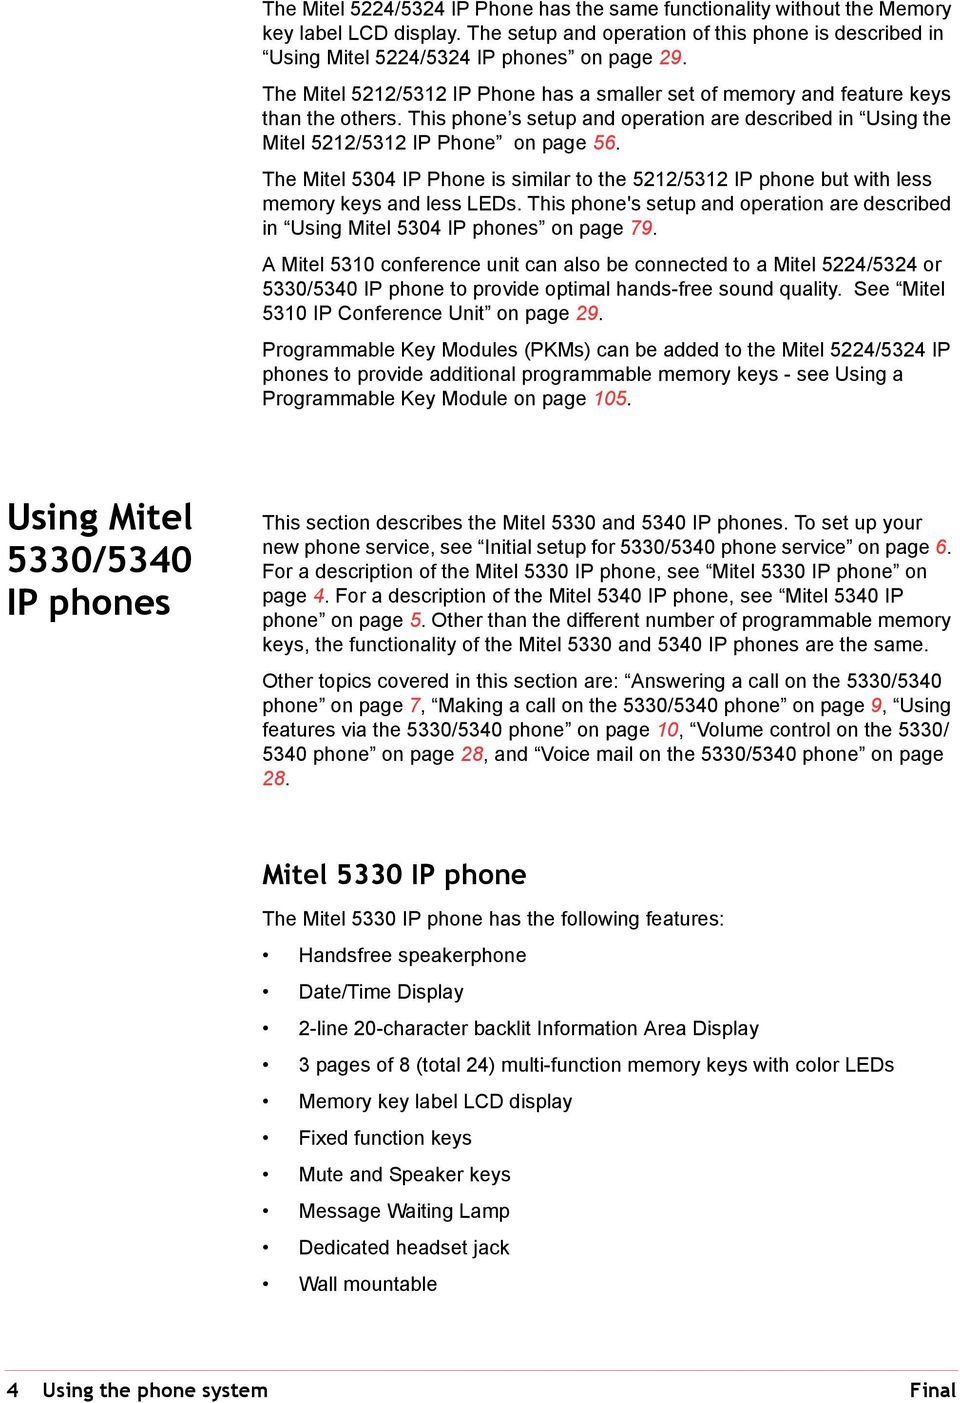 The Mitel 5304 IP Phone is similar to the 5212/5312 IP phone but with less memory keys and less LEDs. This phone's setup and operation are described in Using Mitel 5304 IP phones on page 79.